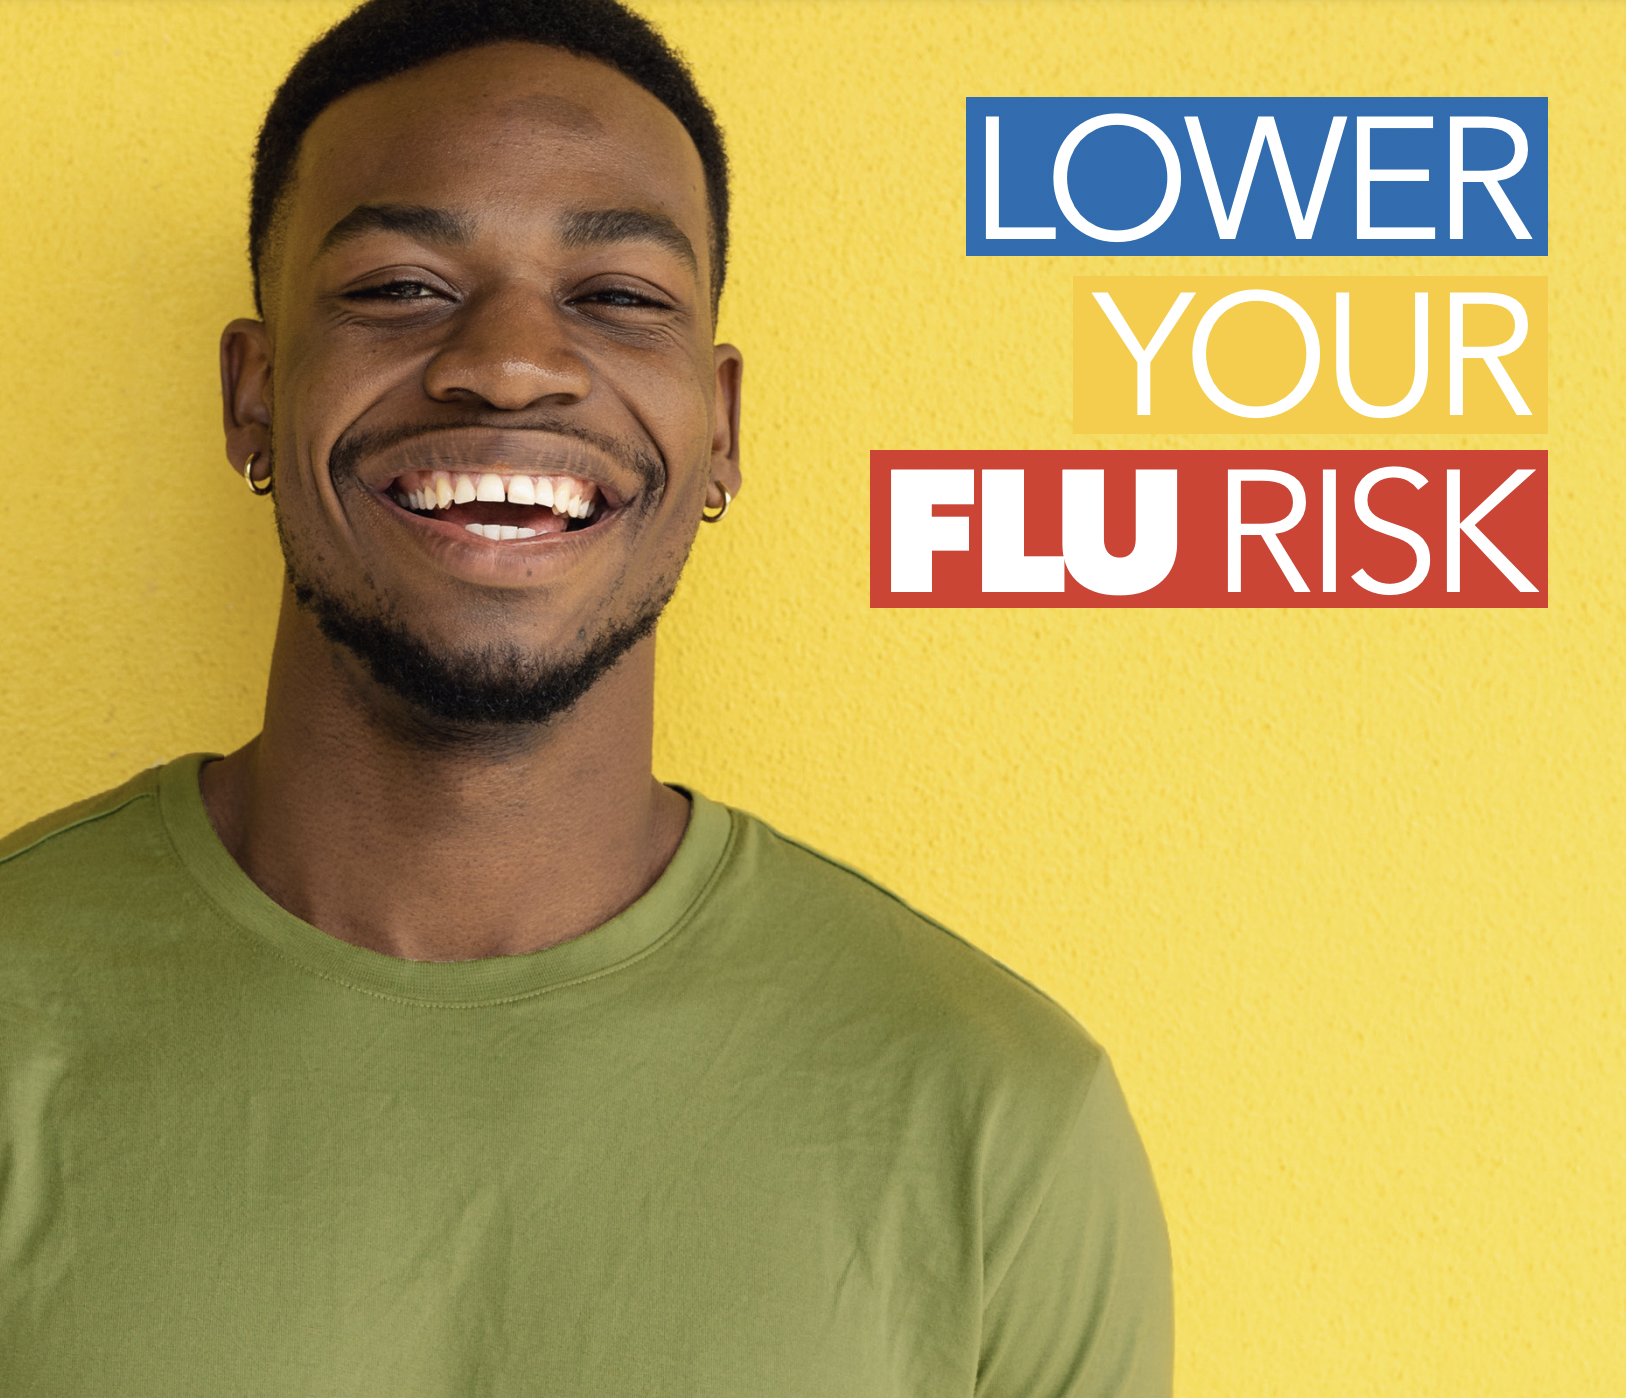 Lower Your Flu Risk: Young Adult